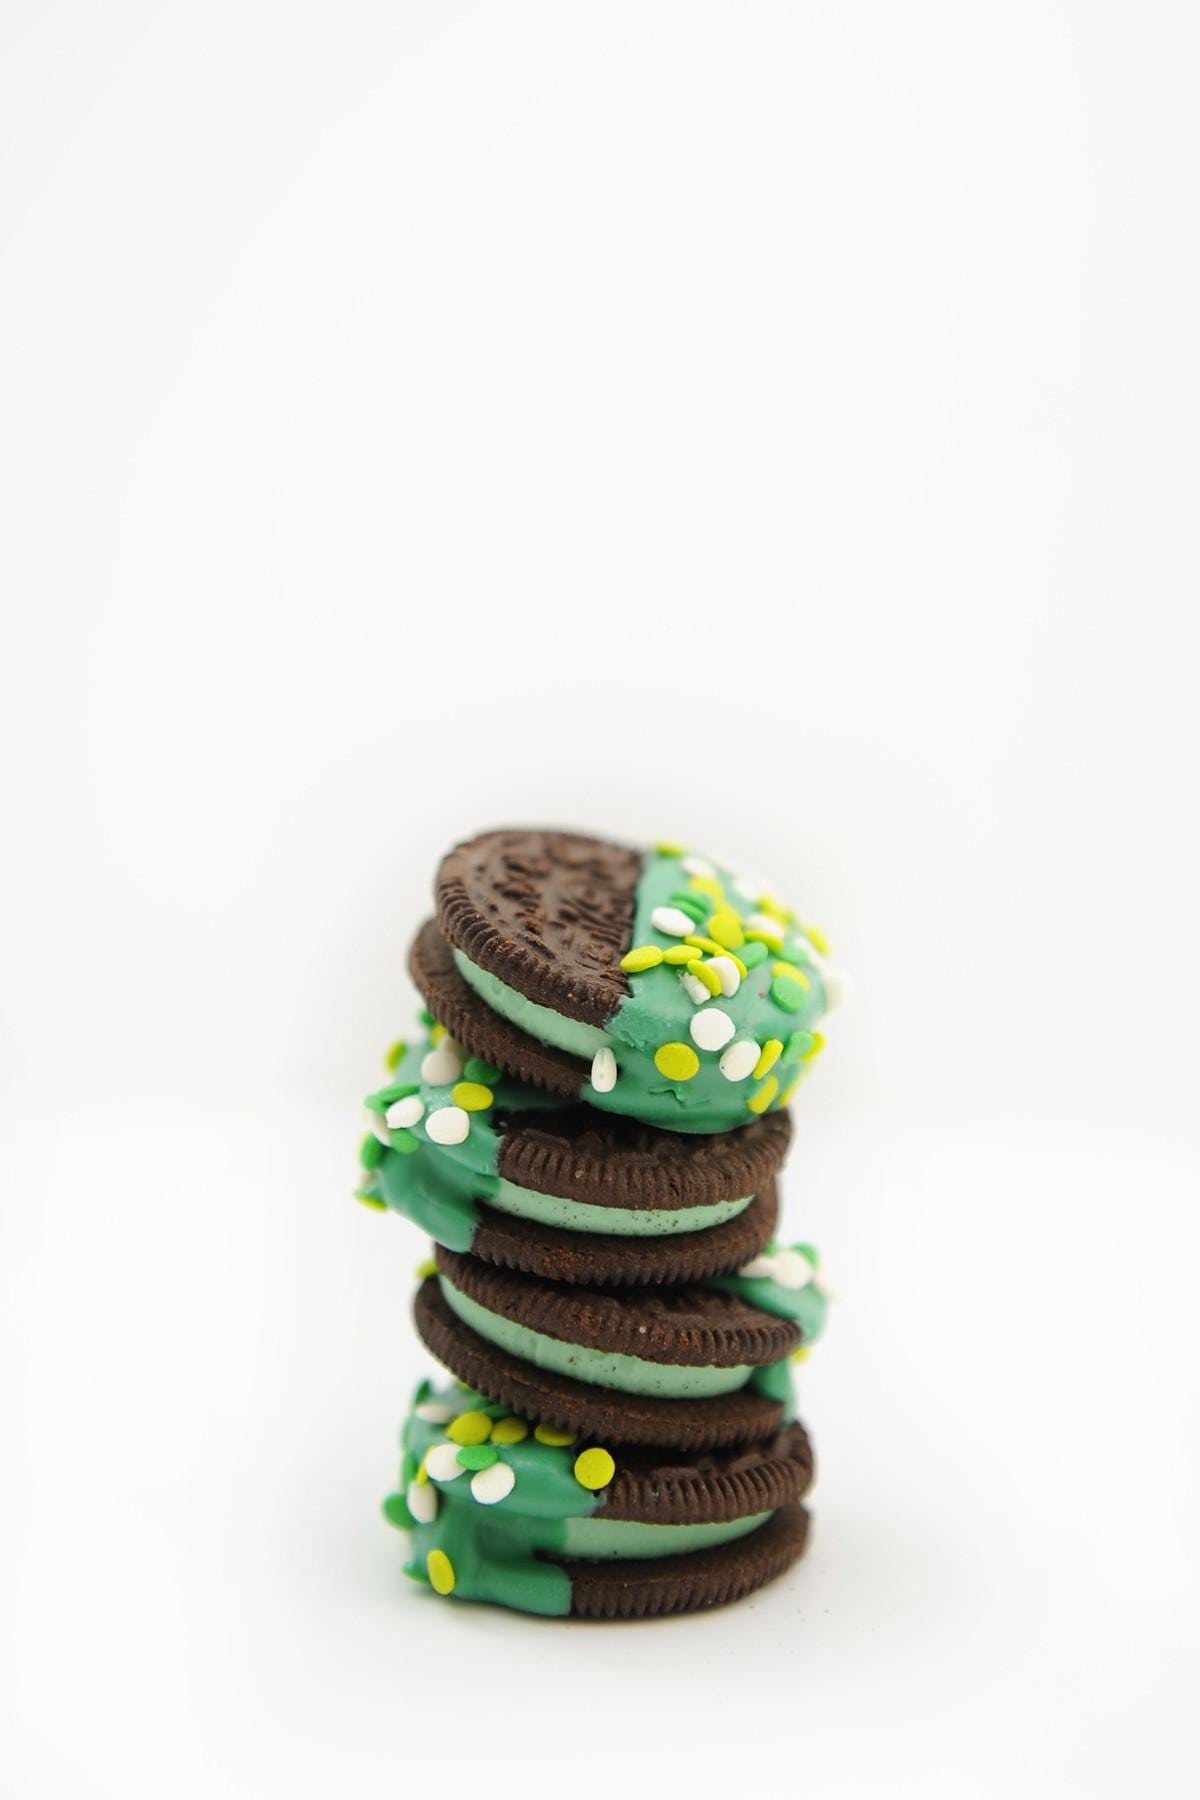 Chocolate Dipped Oreos... News Flash: dessert recipes don't have to be difficult! My favorite post from last week's Linky Party are these delicious and easy Chocolate Dipped Oreos. www.Embellishmints.com